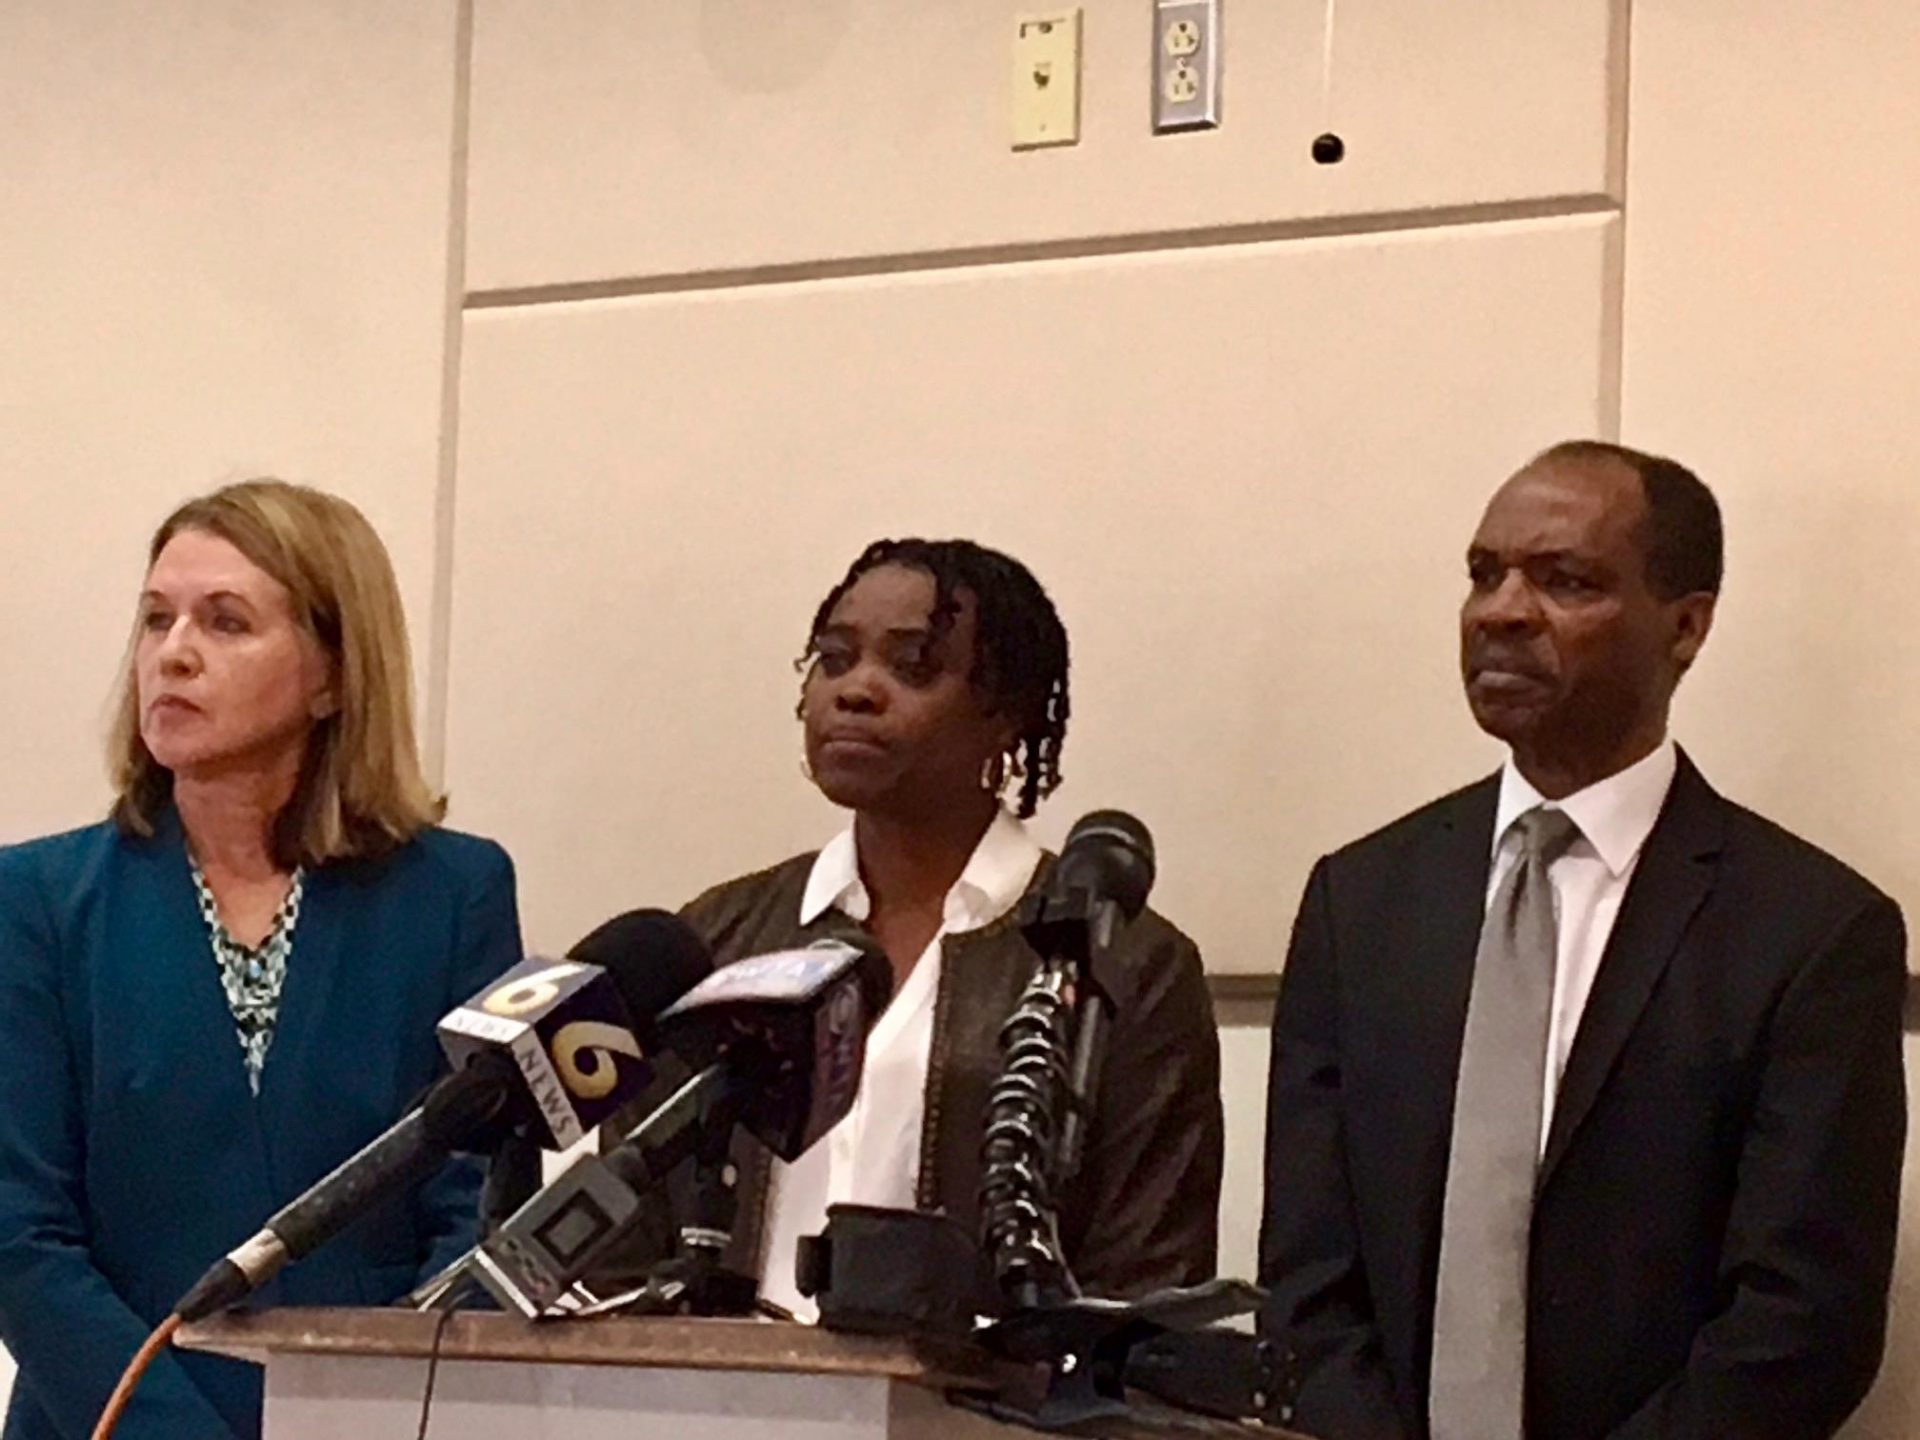 Attorney Kathleen Yurcak stands next to Iyunolu and Sylvester Osagie Sept. 12, 2019, during a press conference in the State College Borough Building. The family plans to sue the State College Police Department. Their son Osaze Osagie was fatally shot by police on March 20, 2019.